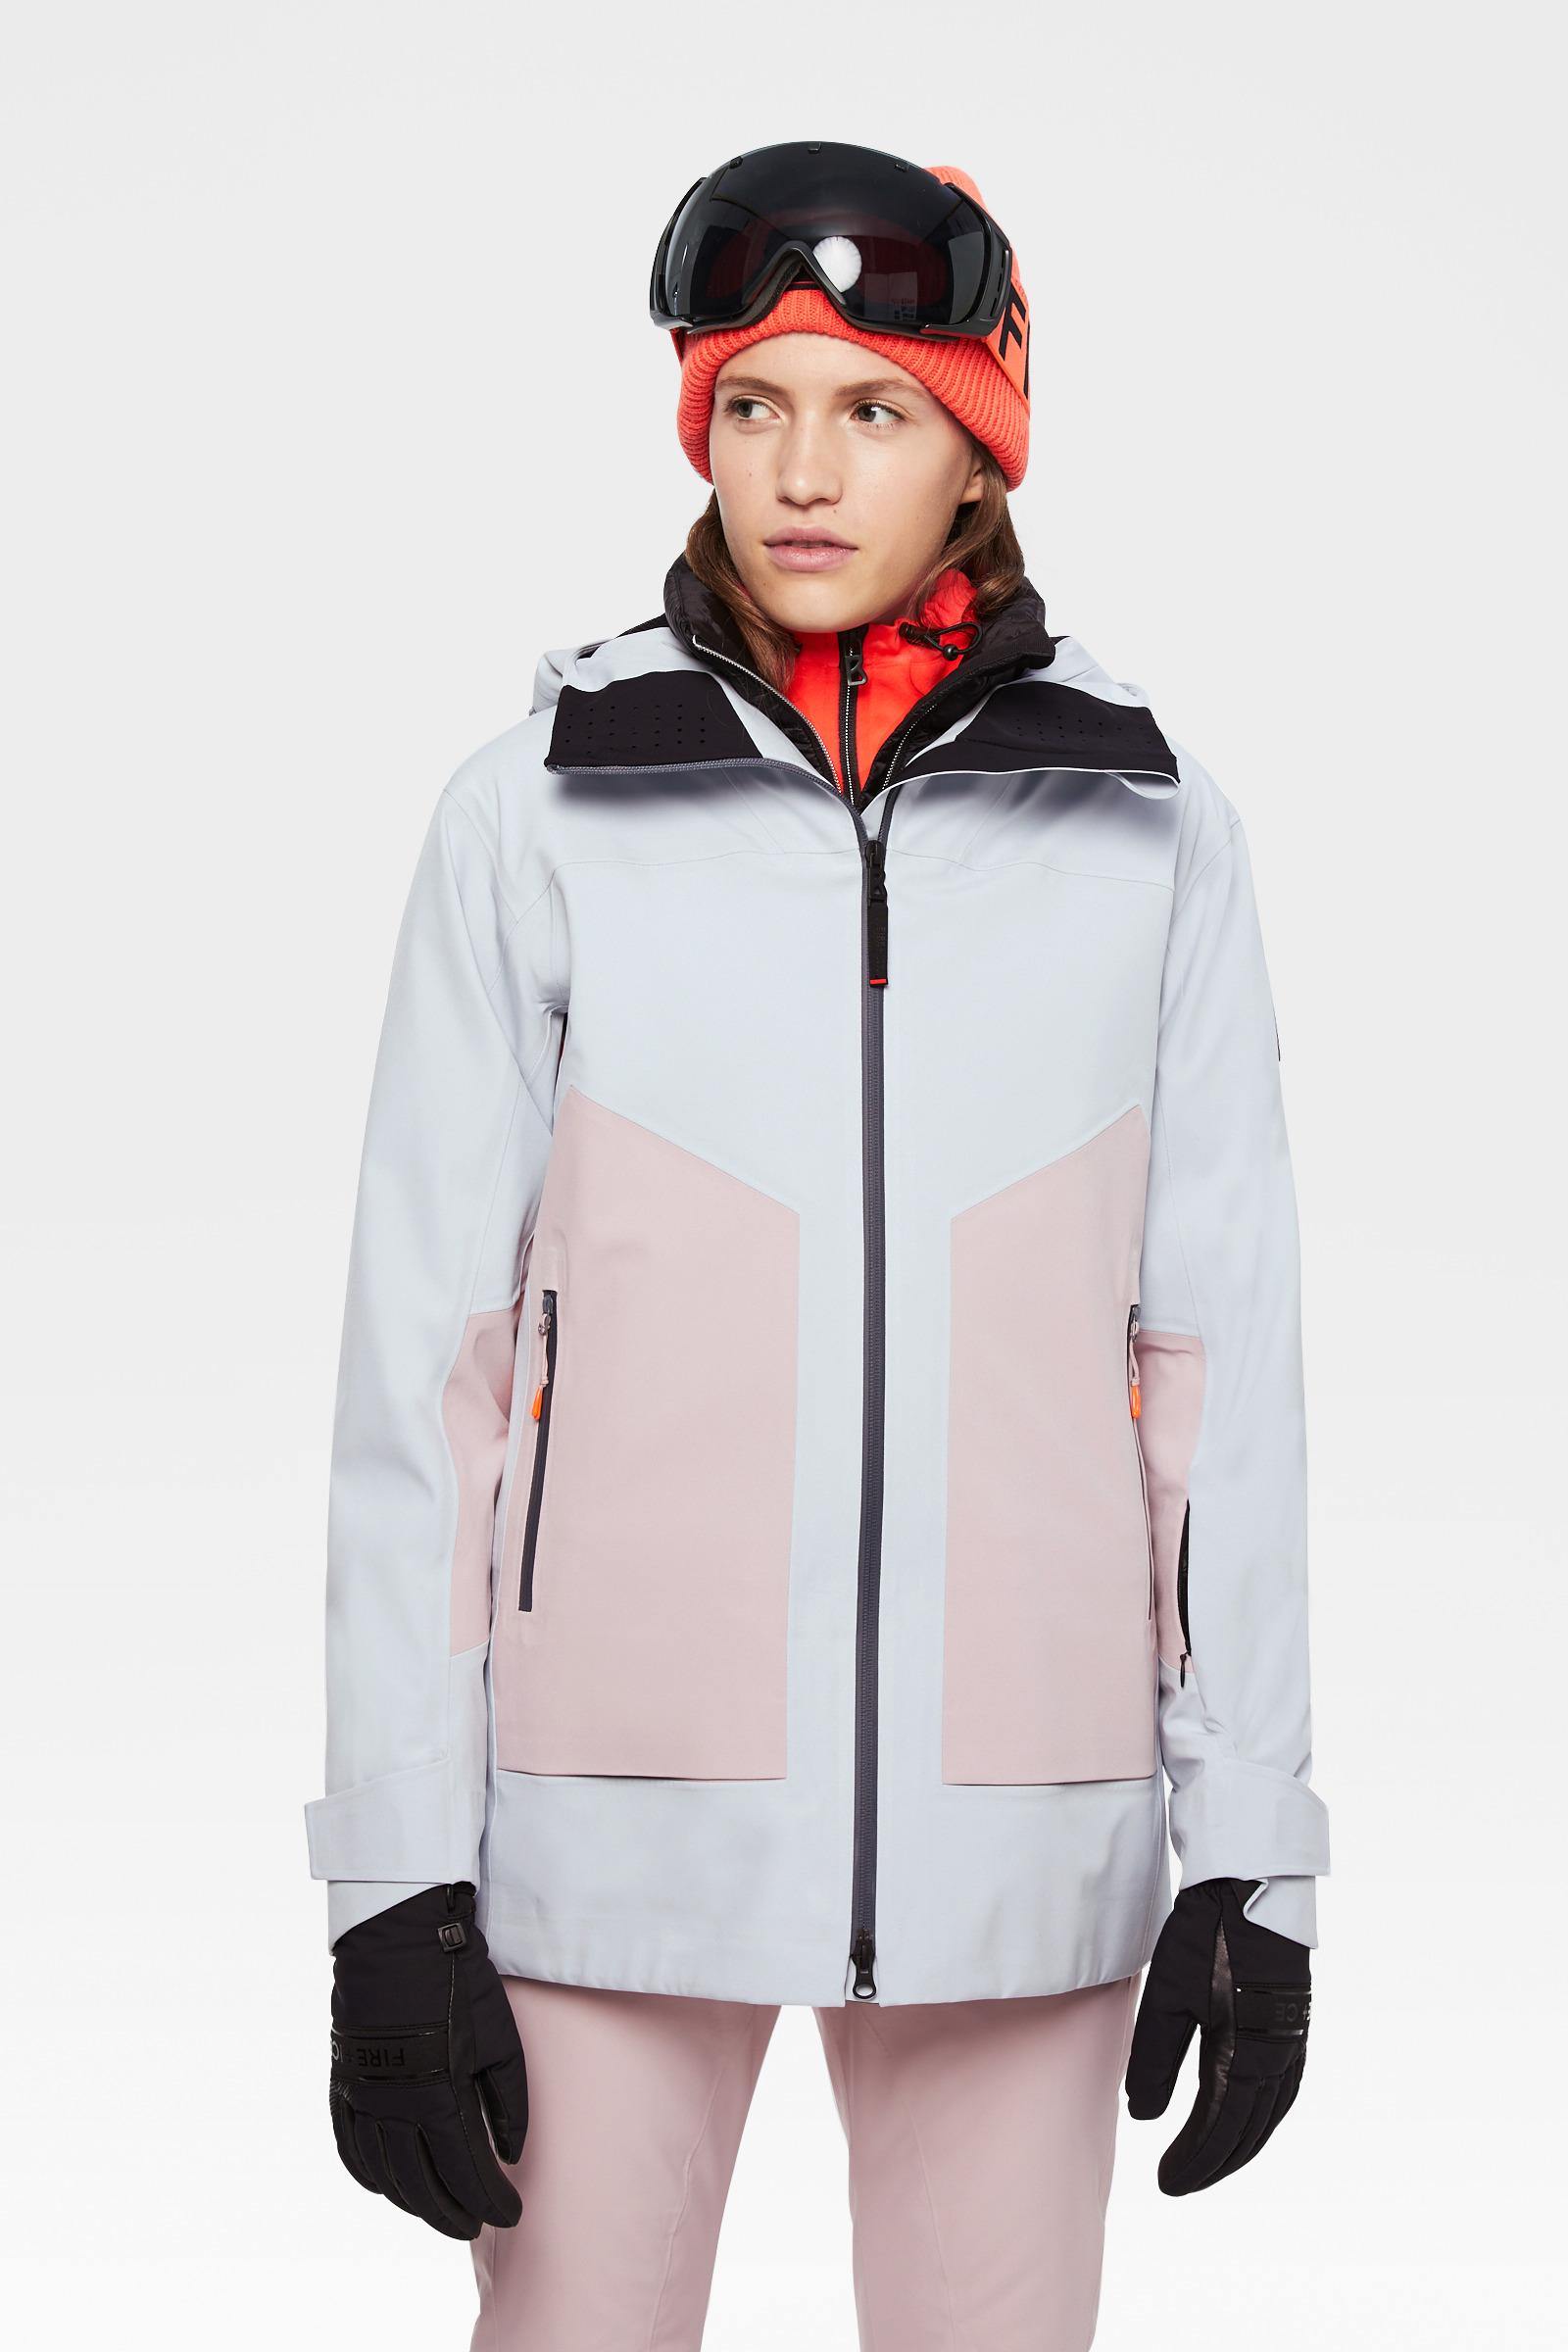 Bogner Fire + Ice Agnes Ski Jacket In Ice Gray/pink - Lyst